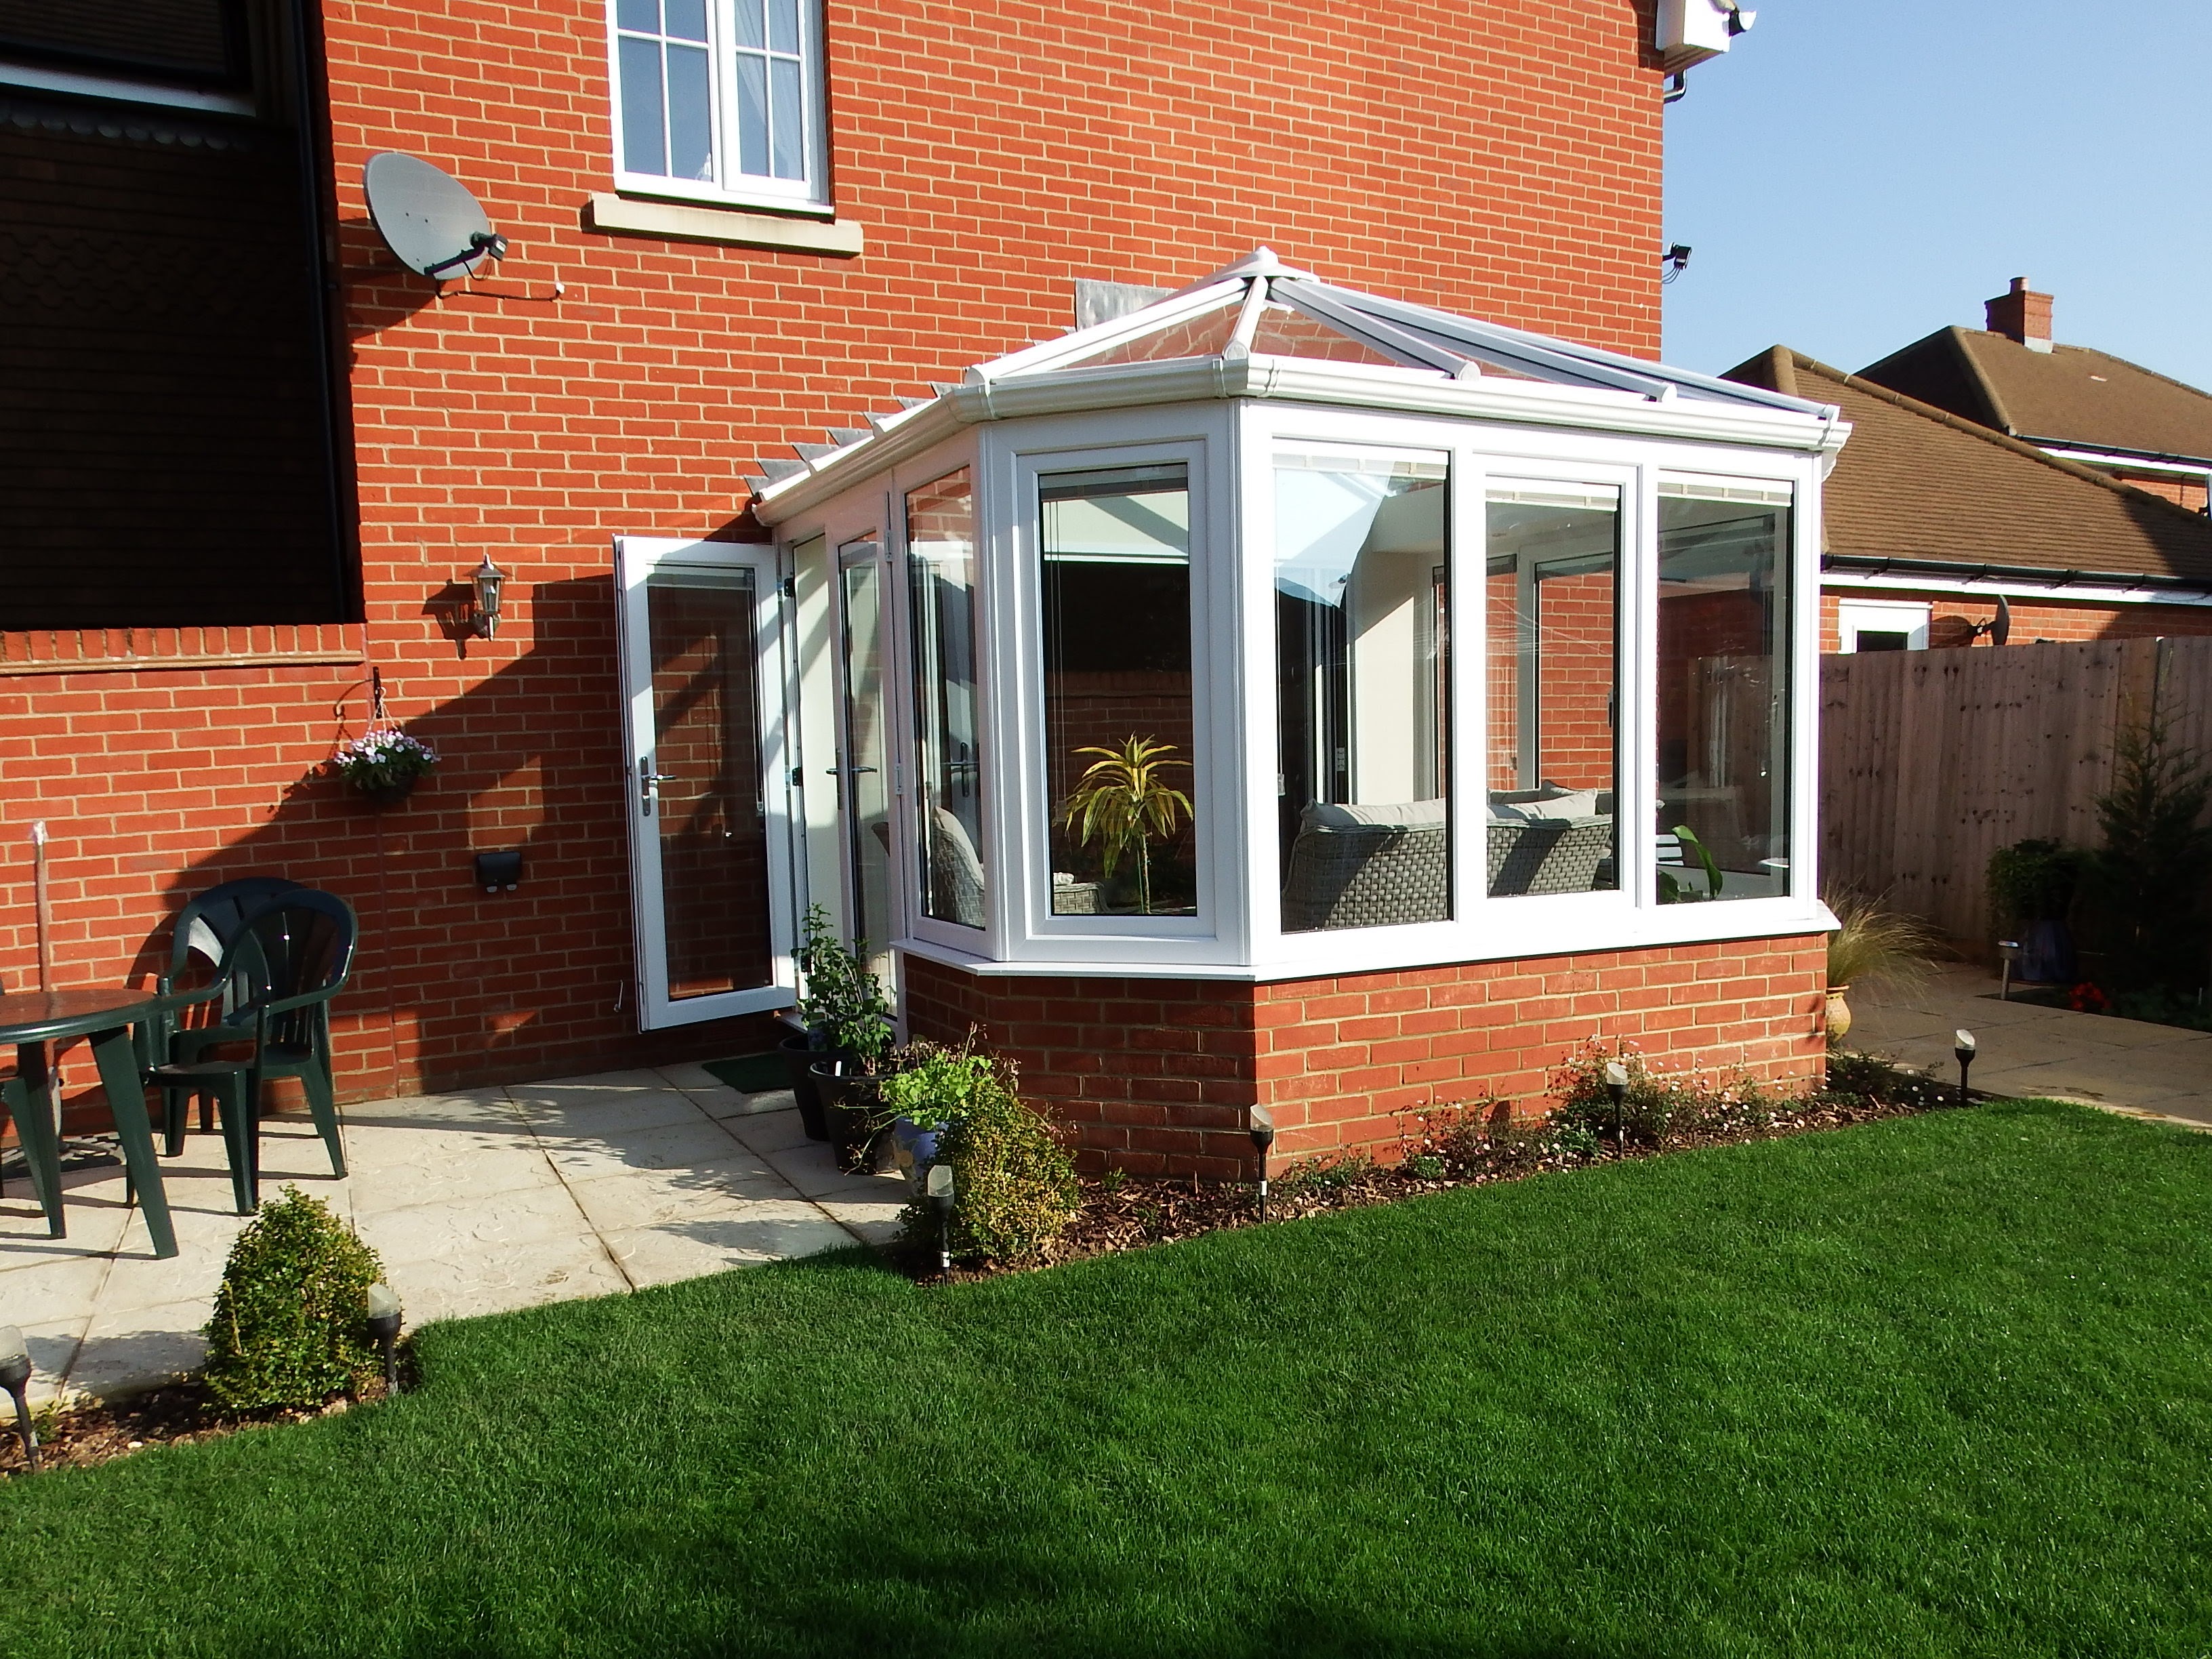 Image of a small and cosy Livin room conservatory design.